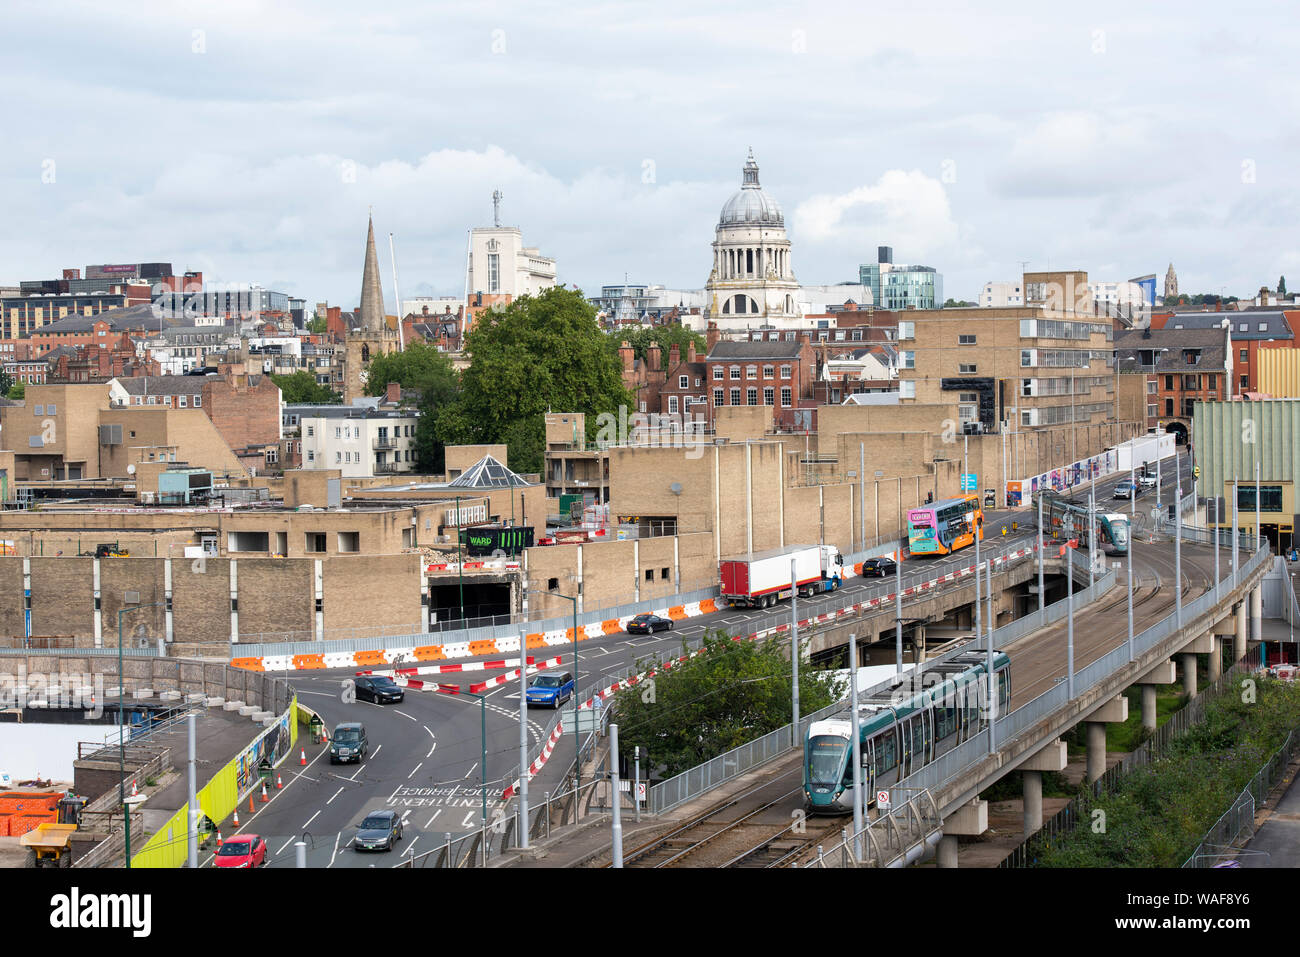 Nottingham City Centre, captured from the roof of Loxley House on Station Street in Nottingham, England UK Stock Photo